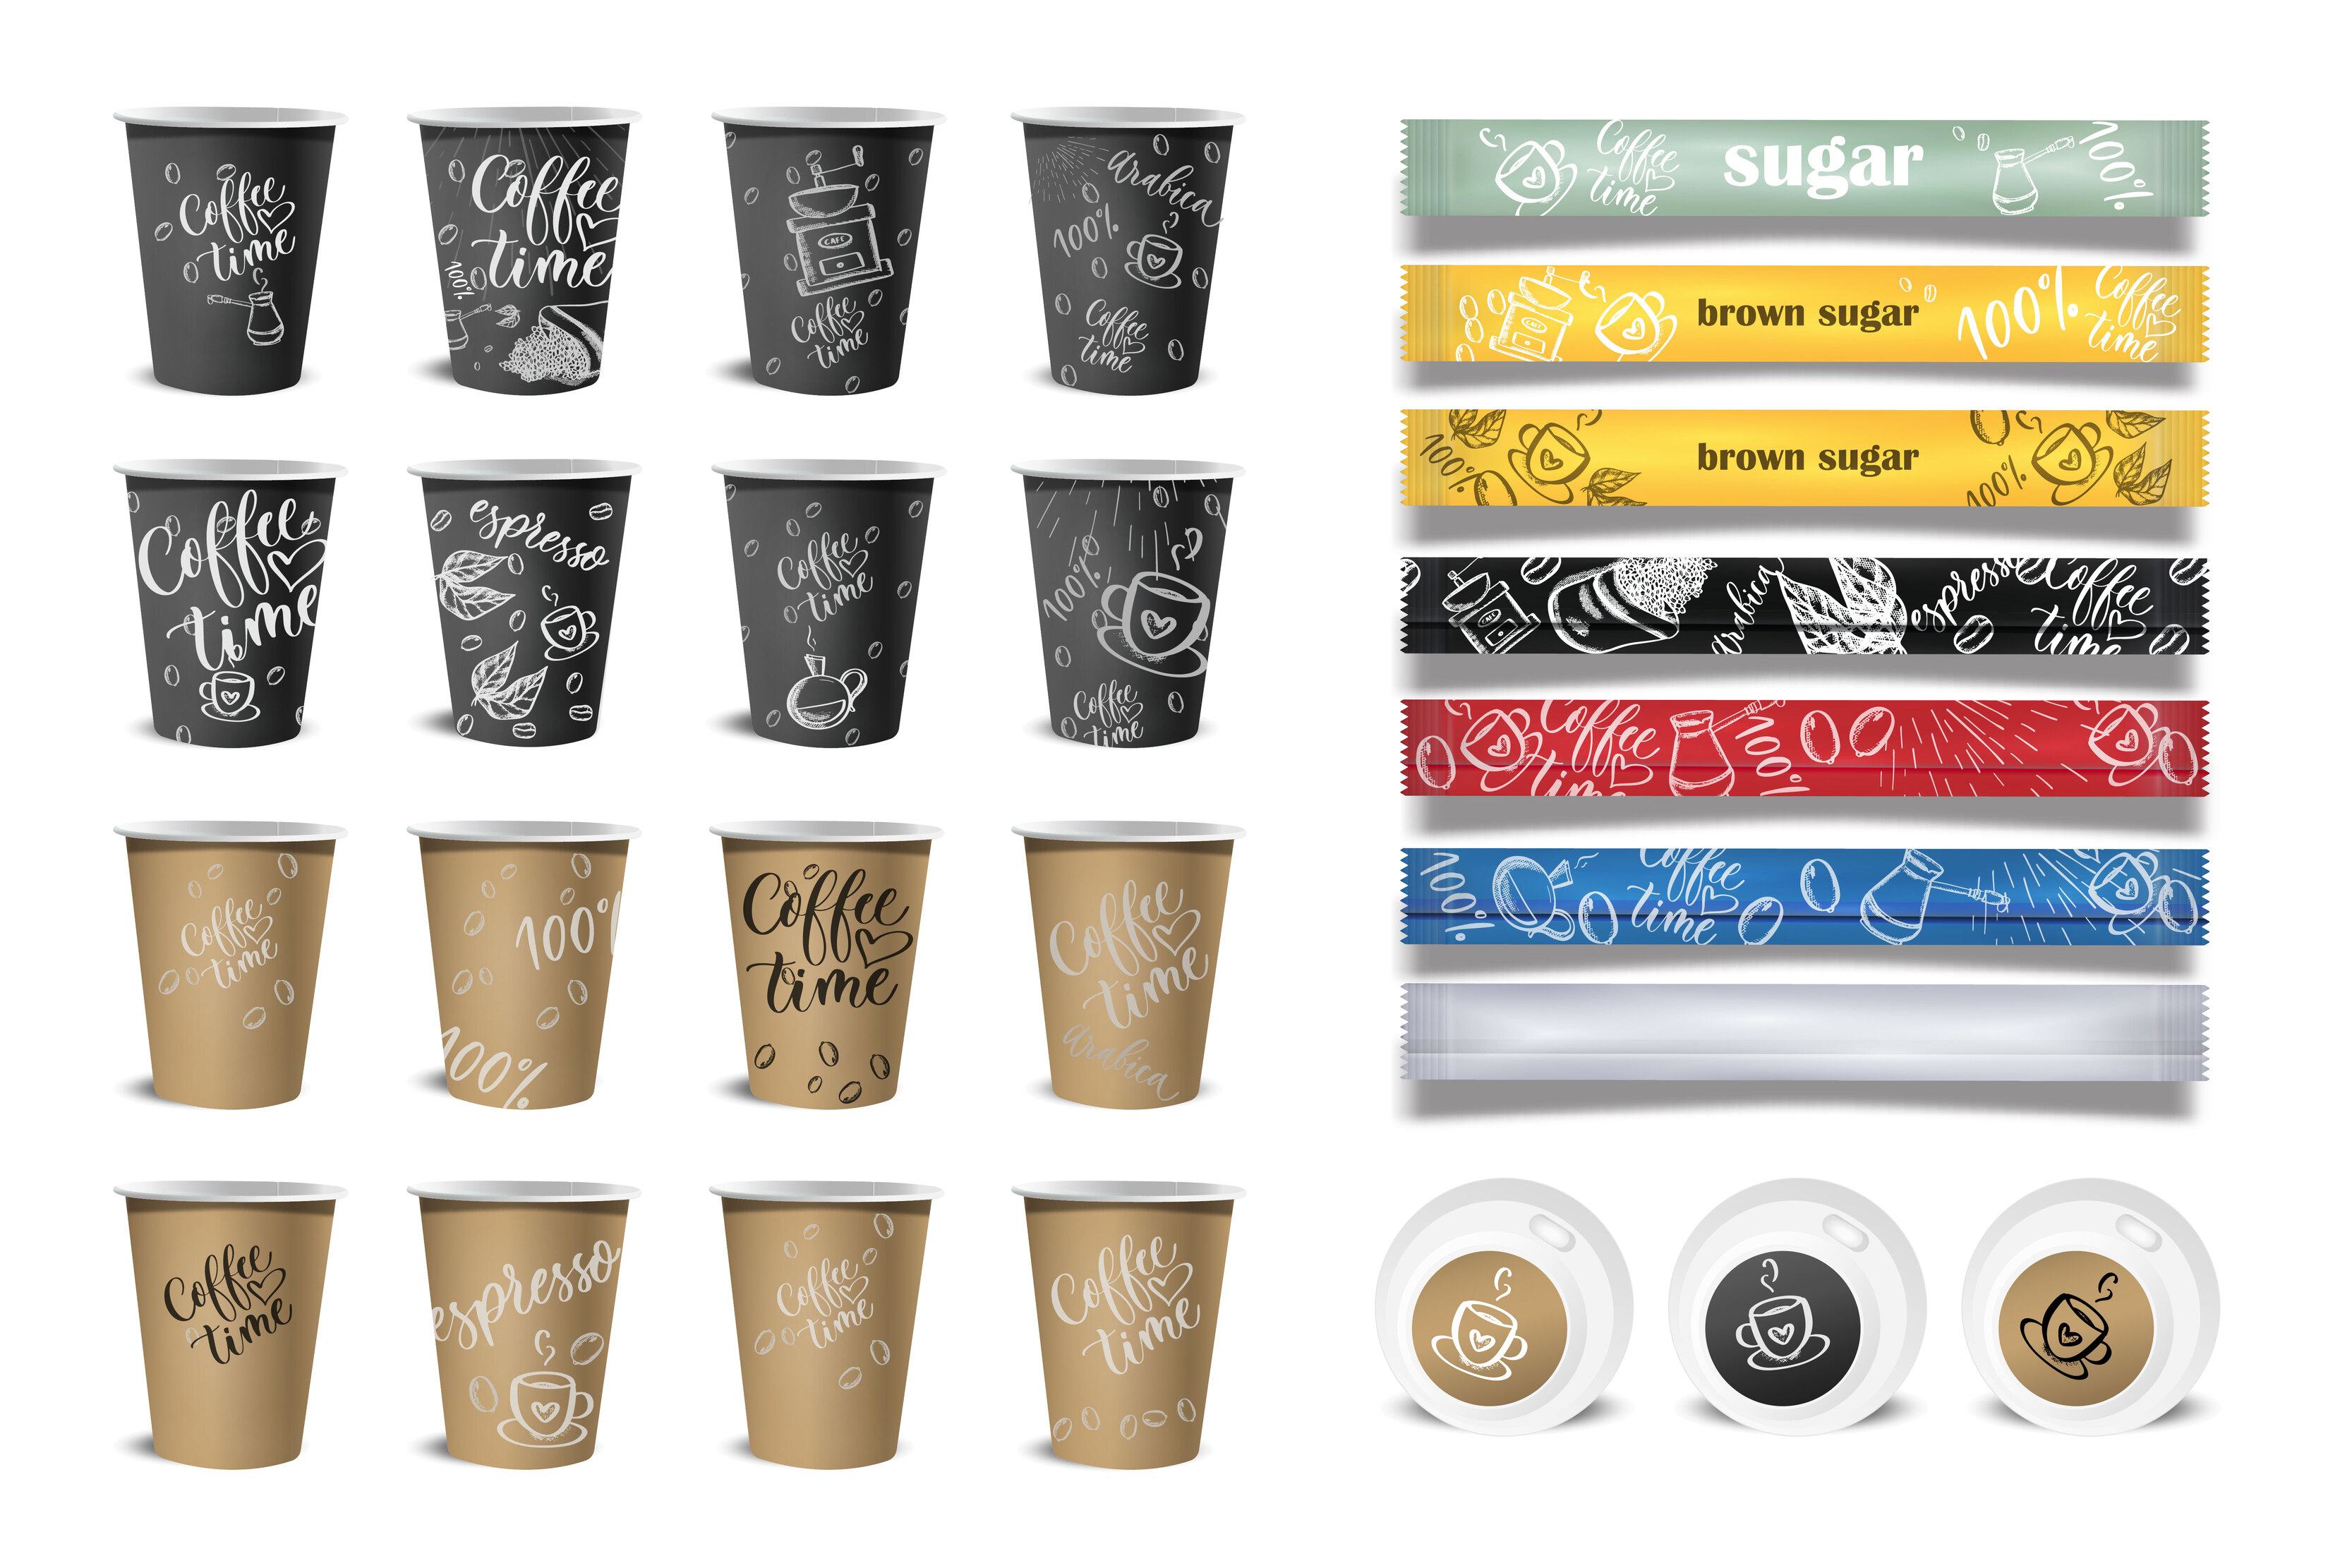 https://static.vecteezy.com/system/resources/previews/005/093/055/original/realistic-blank-paper-coffee-cup-set-isolated-on-white-background-design-template-eps10-illustration-vector.jpg